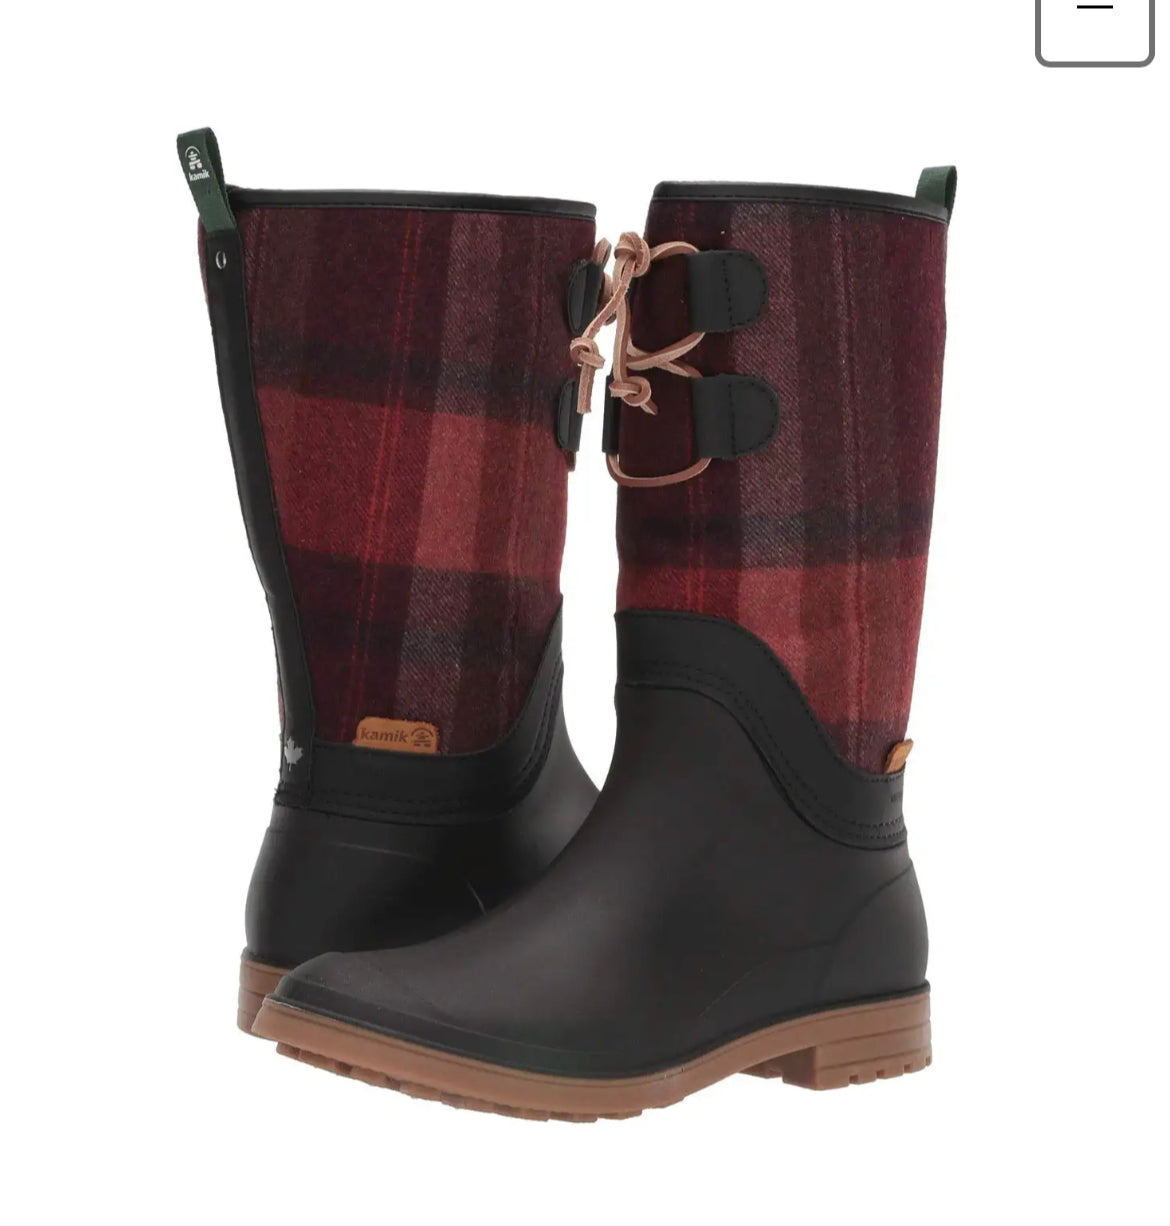 Kamik Abigail Rain Boots for Ladies - All Mixed Up 